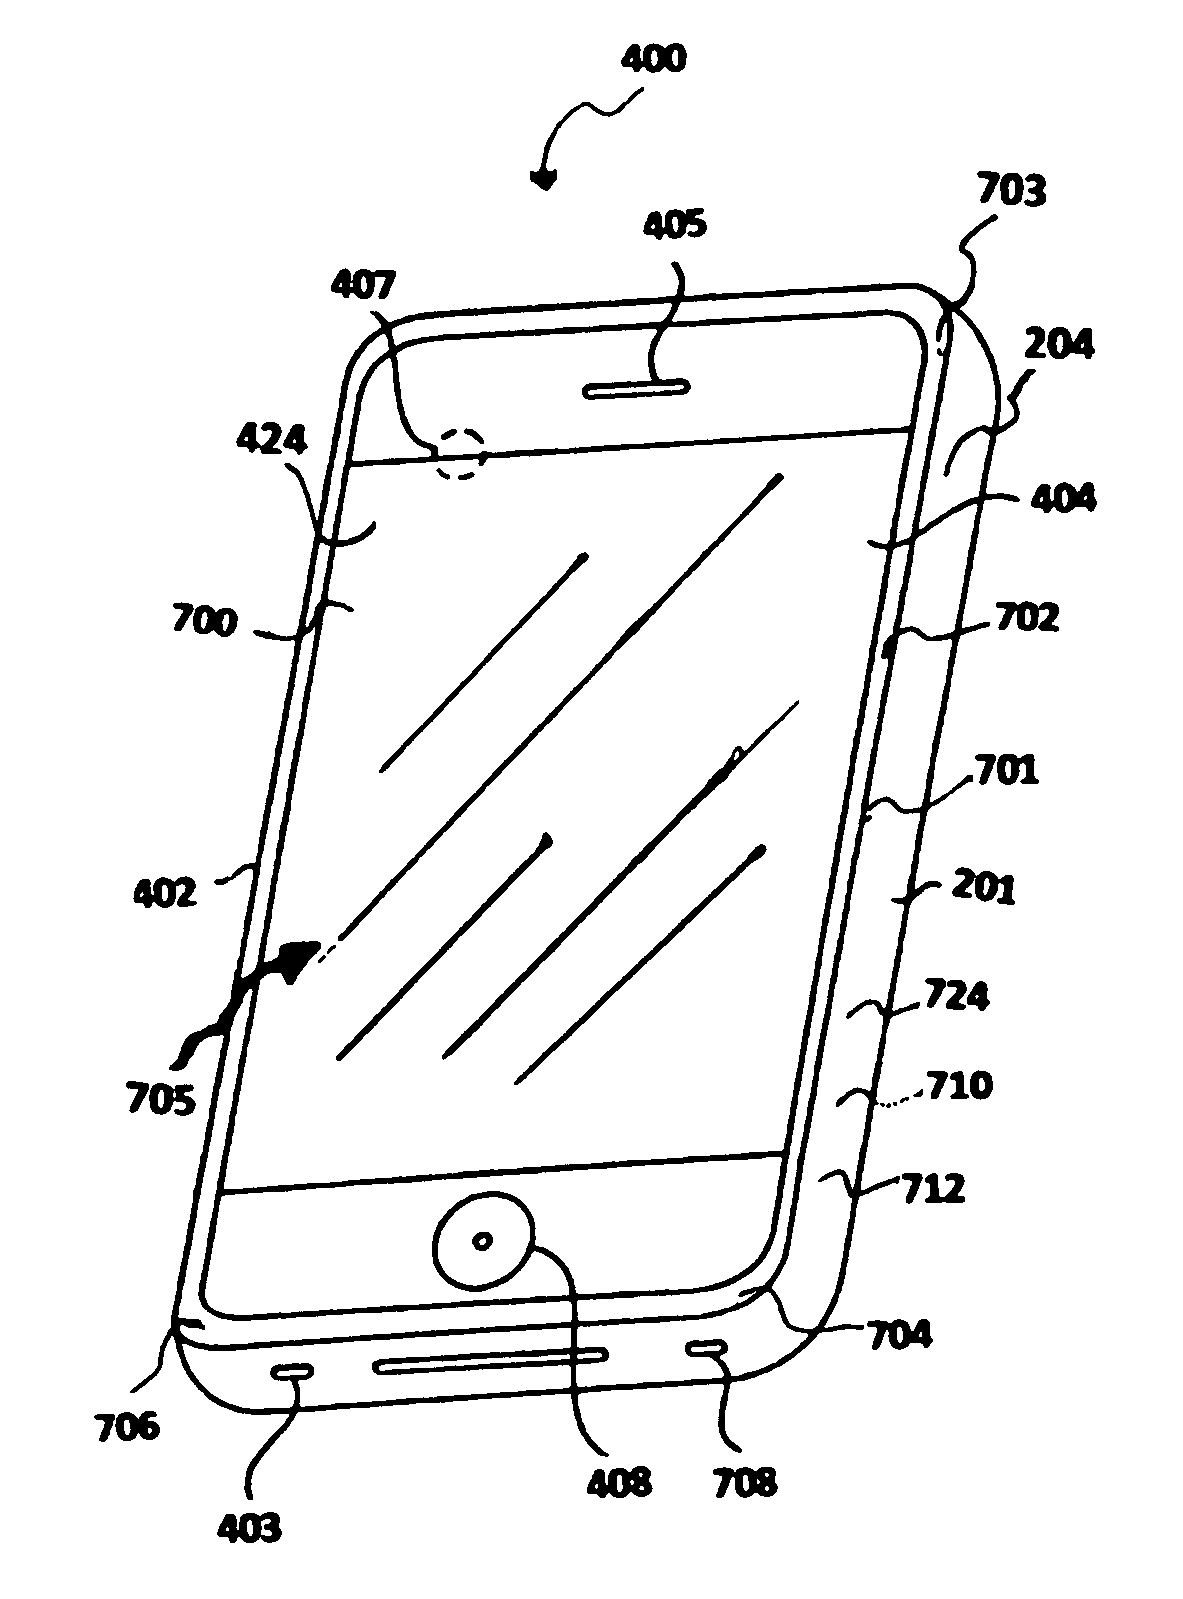 Energy harvesting mega communication device and media apparatus configured with apparatus for boosting signal reception